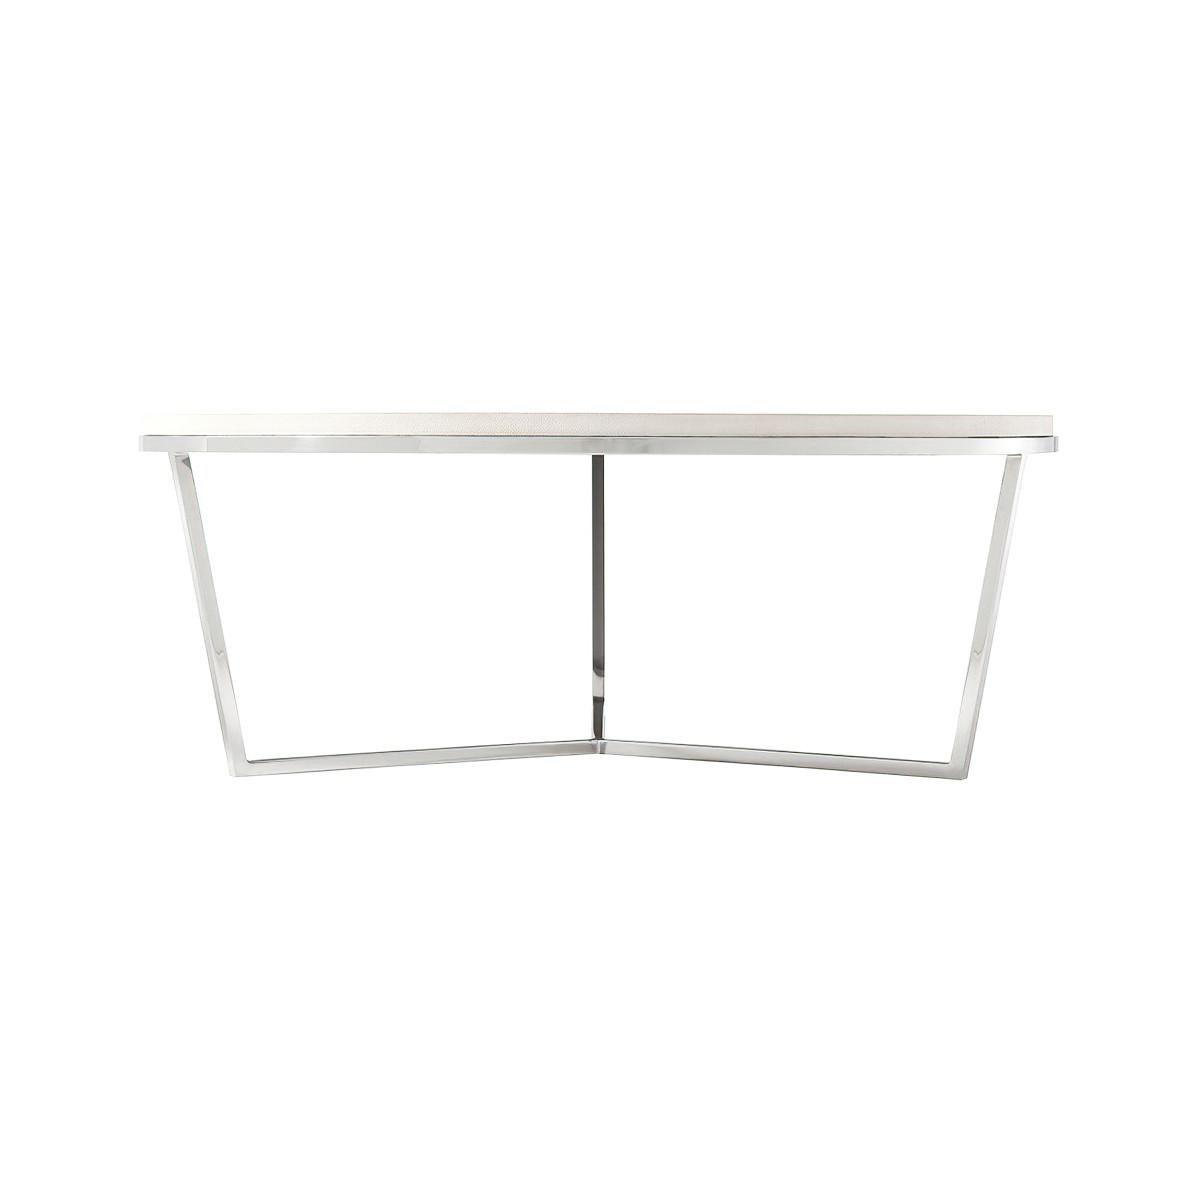 A modern leather top coffee table with a stepped edge. This circular embossed leather top rests on a polished nickel finish base.

Dimensions: 47.25